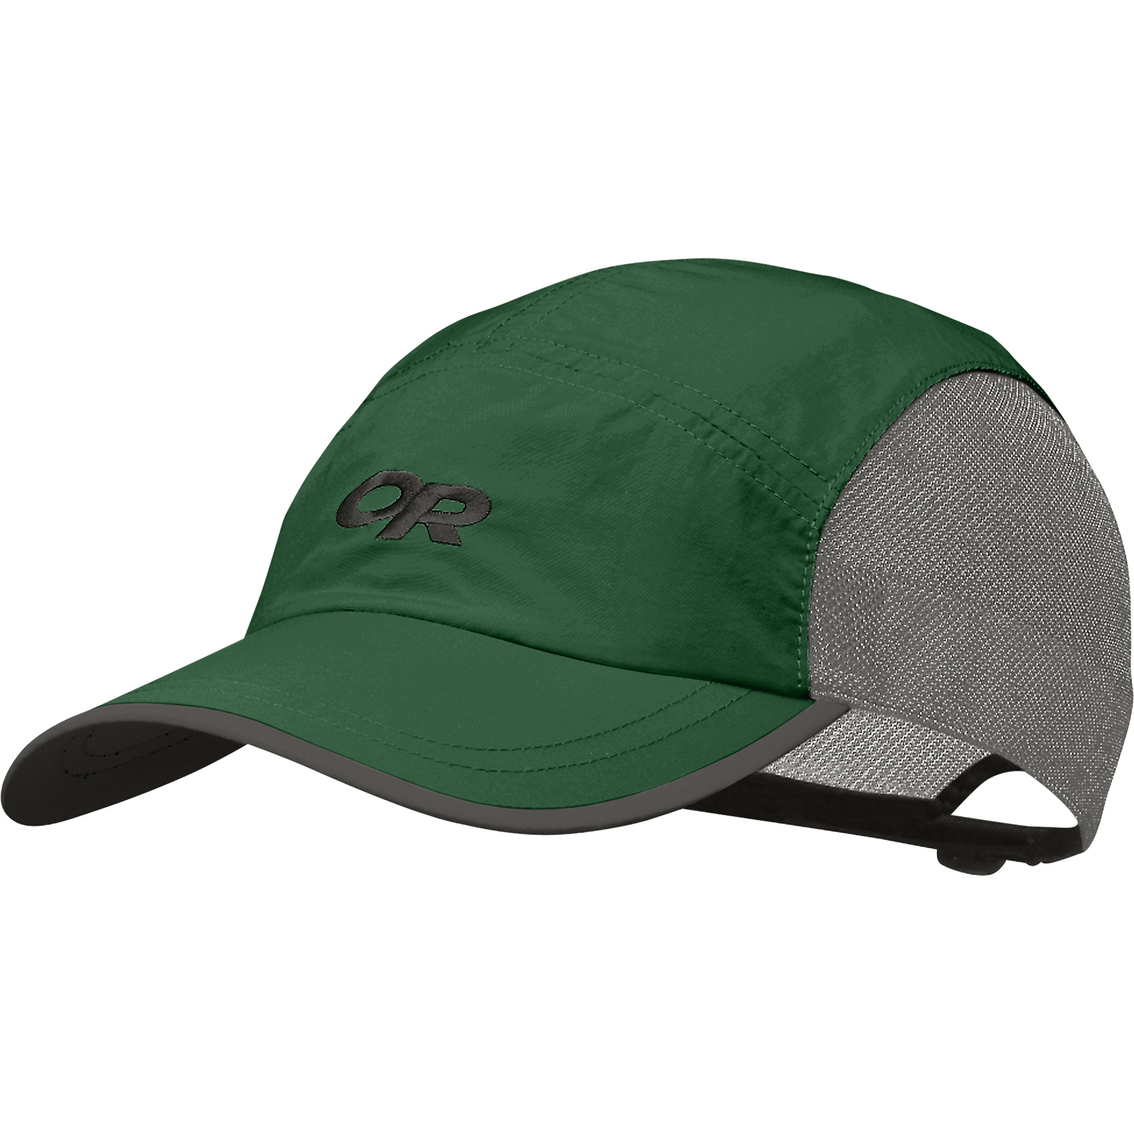 Outdoor Research Swift Cap | Hats & Visors | Clothing & Accessories ...